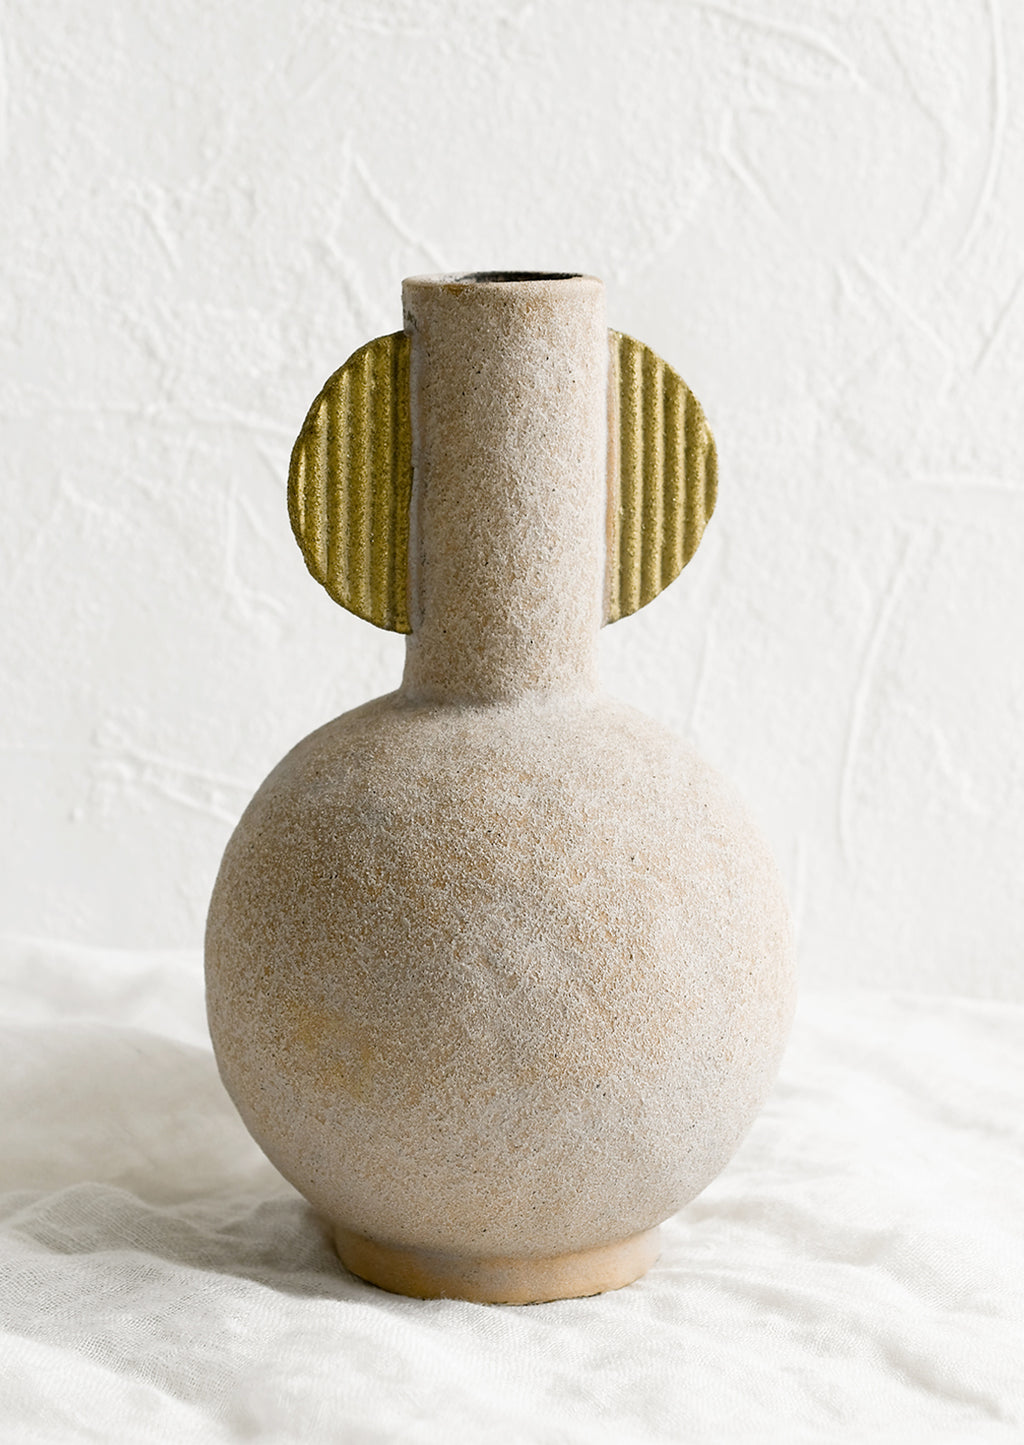 1: A sculptural ceramic vase with narrow neck opening.